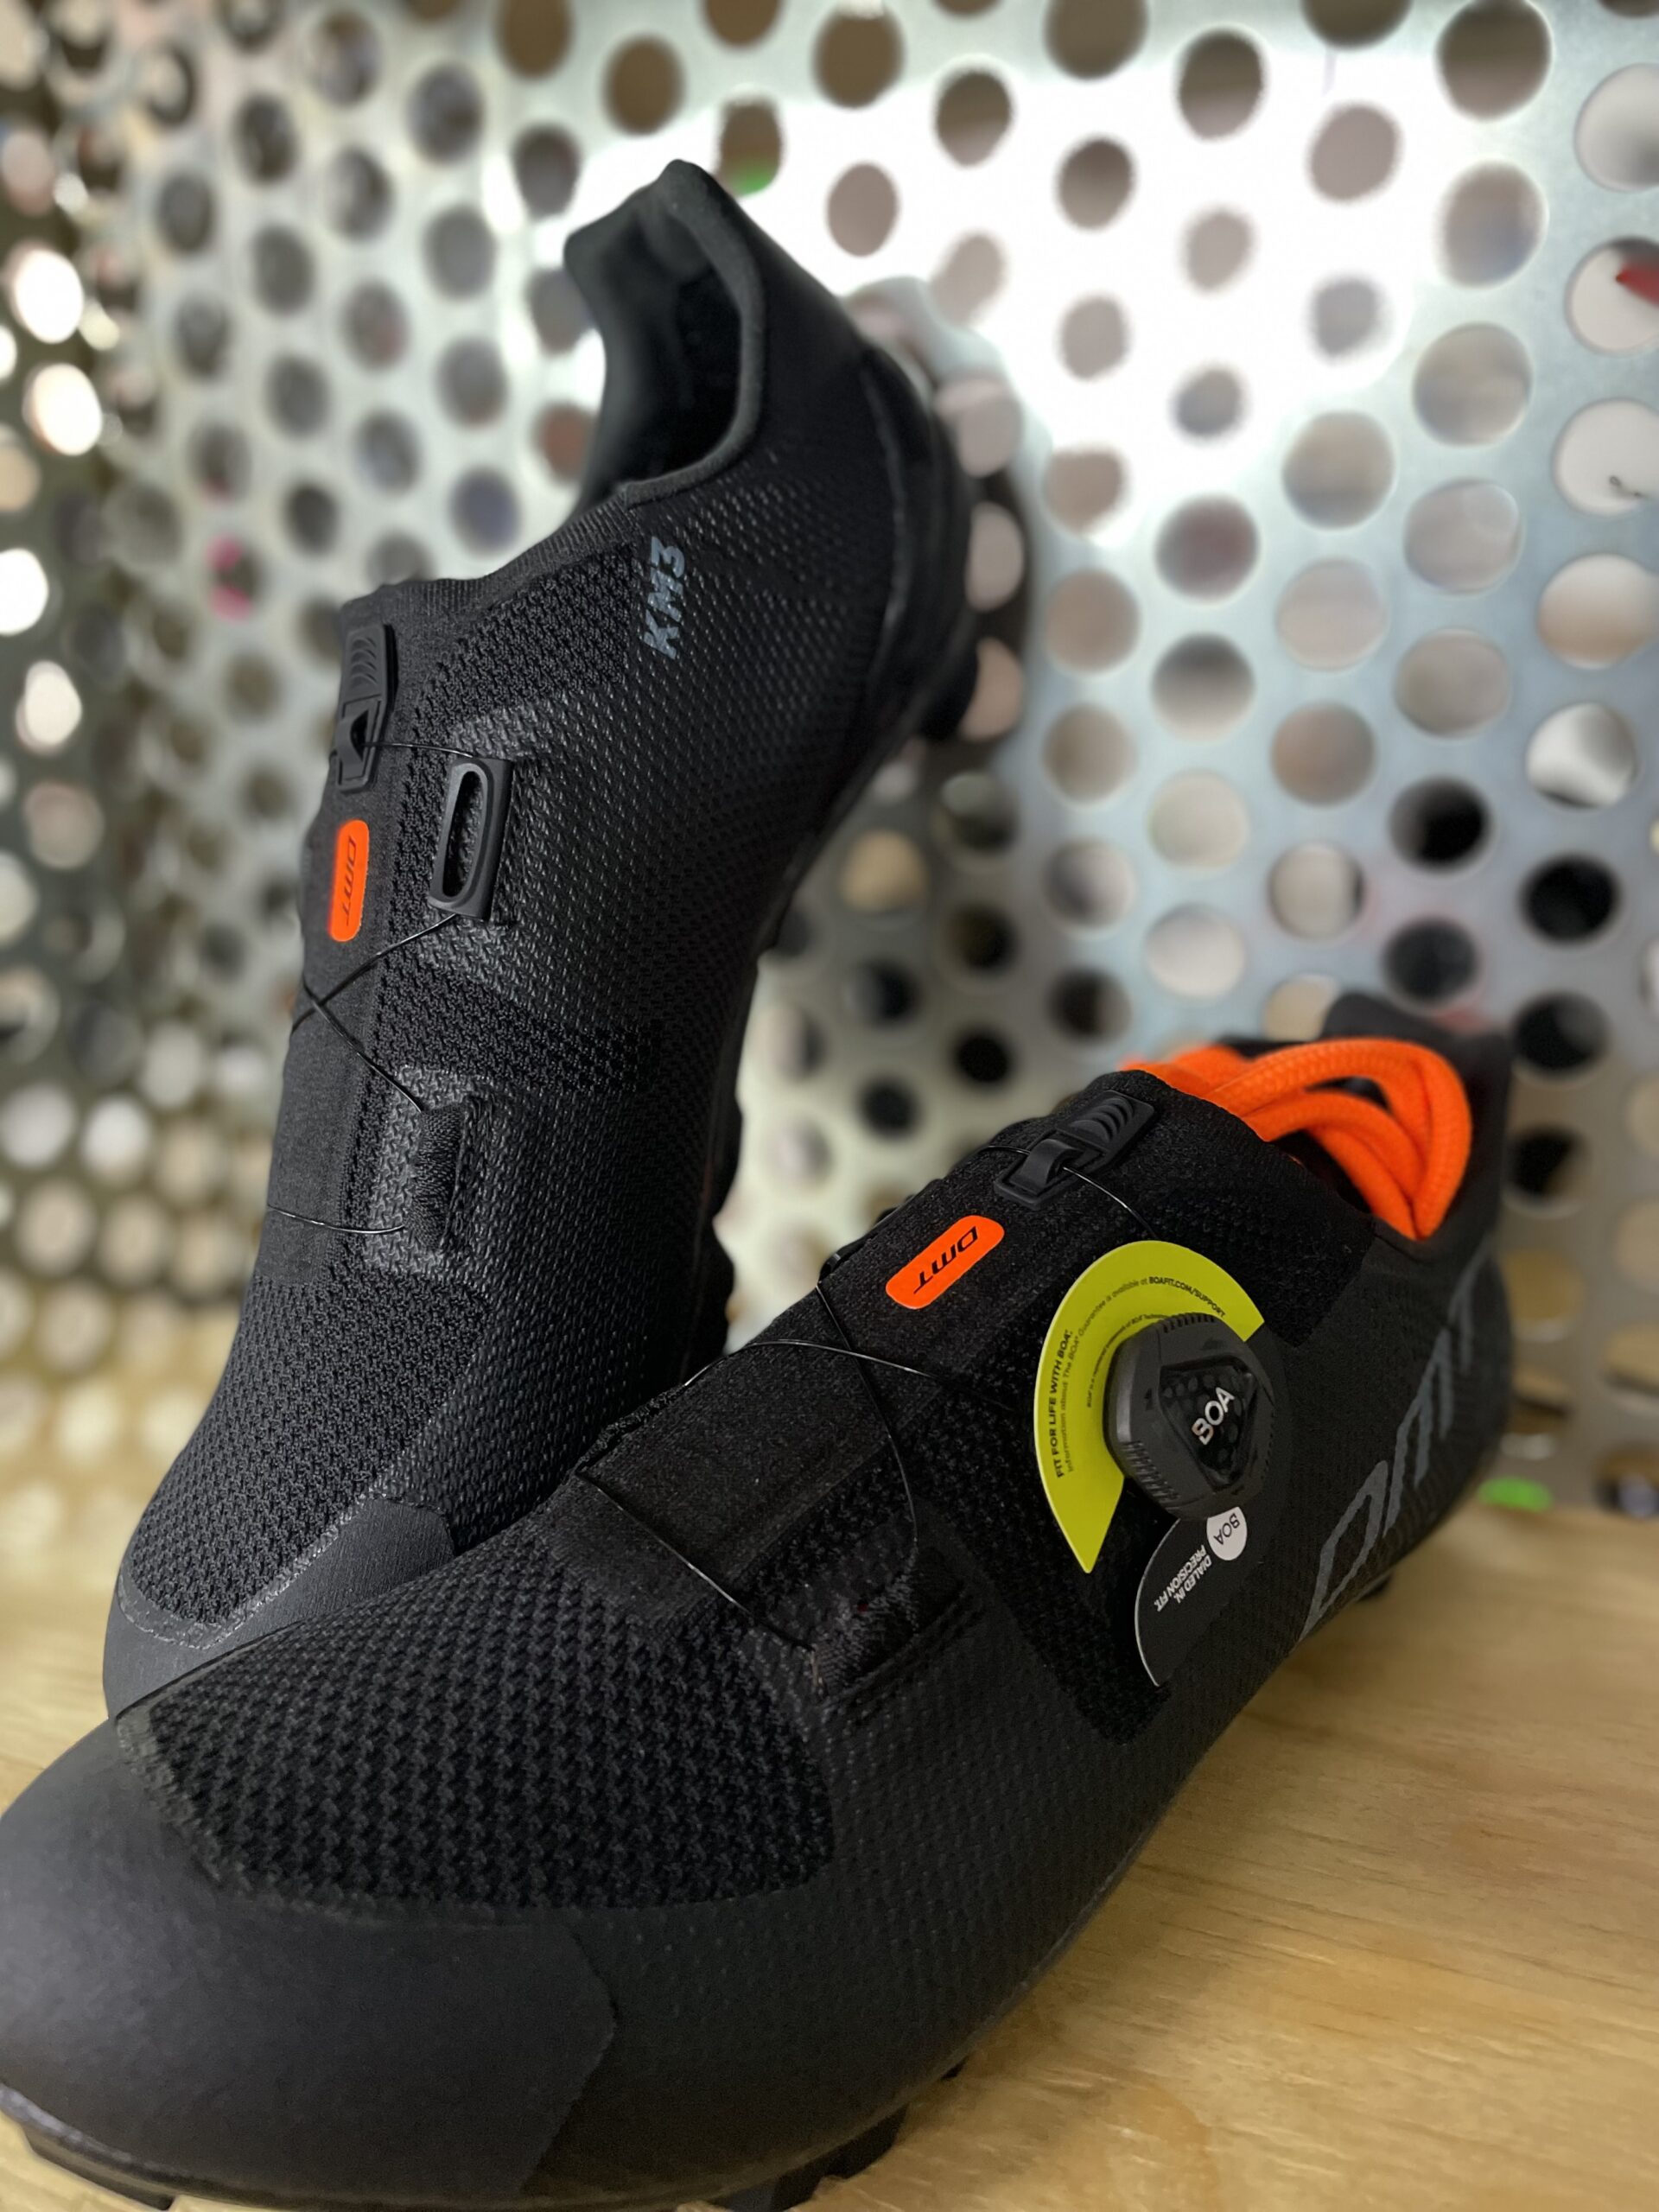 DMT KM3 MTB Shoe - Contact for size availability